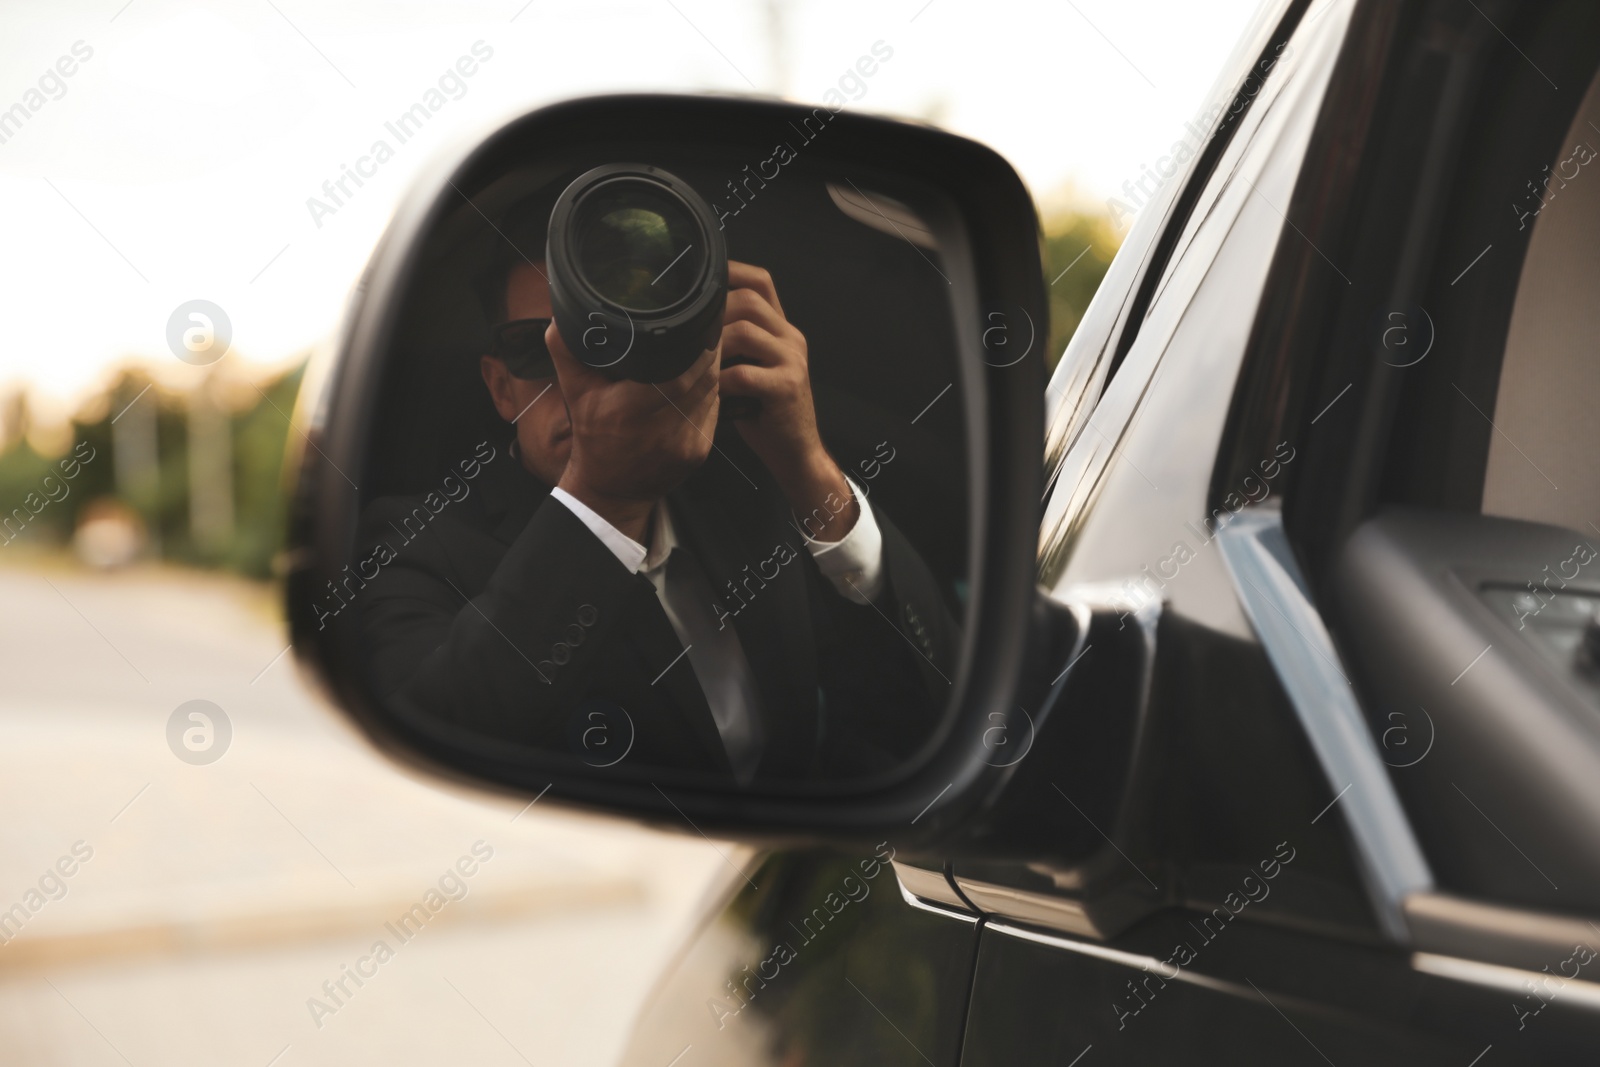 Photo of Private detective with camera spying from auto, view through car side mirror